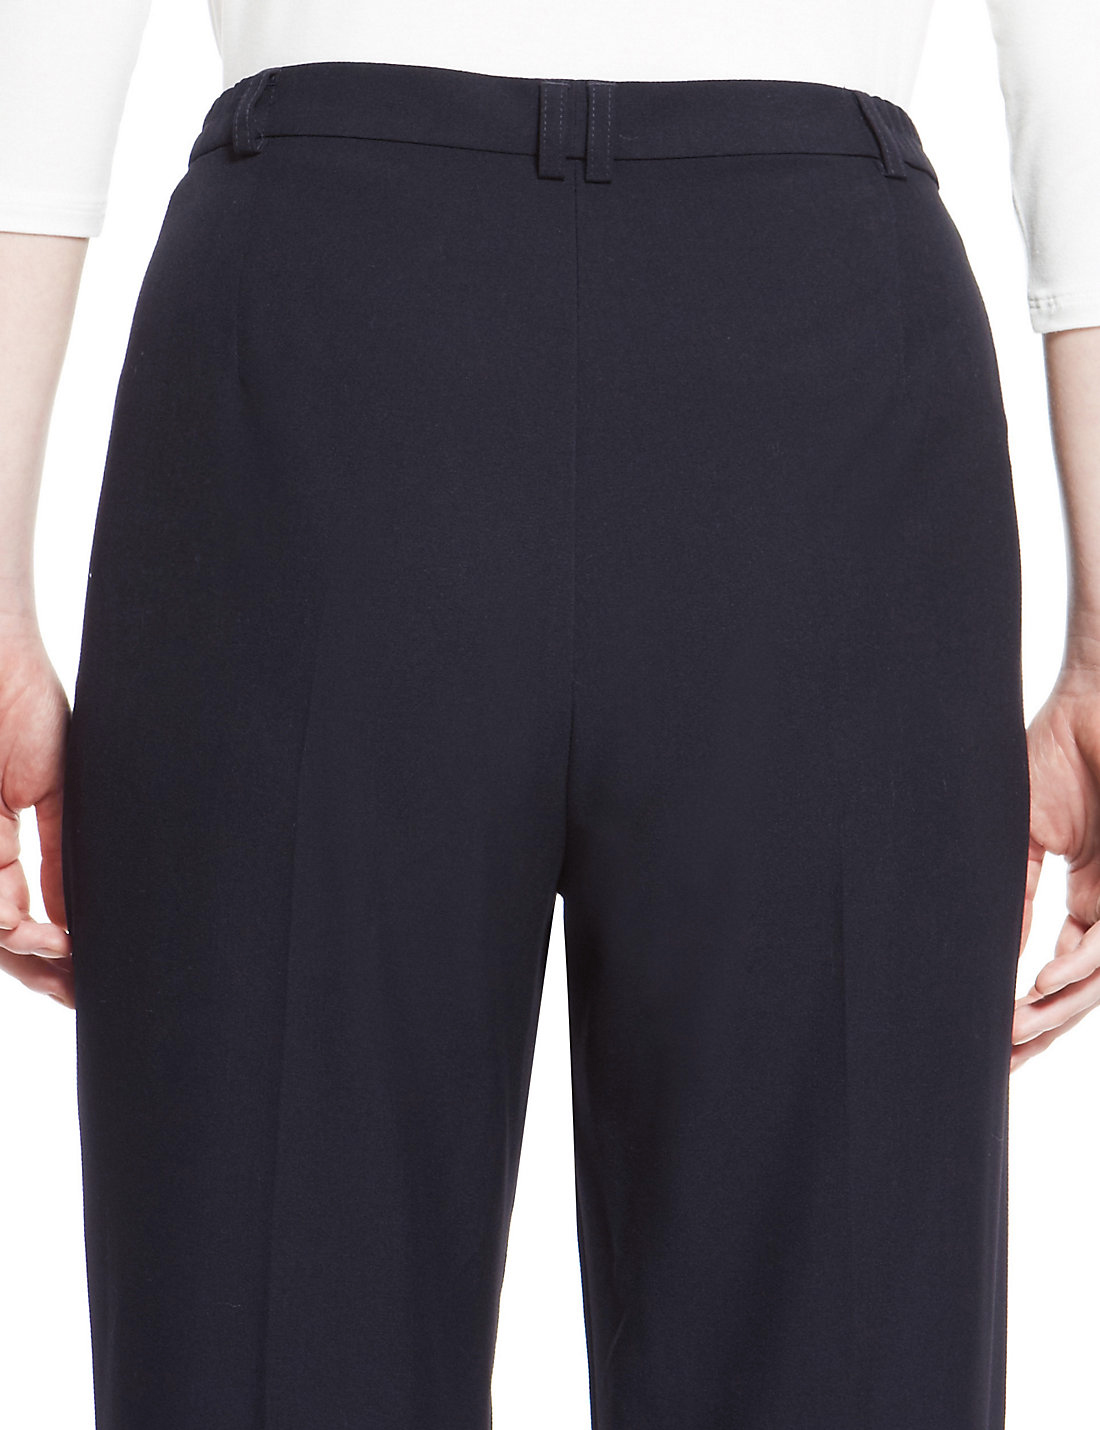 Marks and Spencer - - M&5 NAVY Straight Leg Trousers - Size 22 to 28